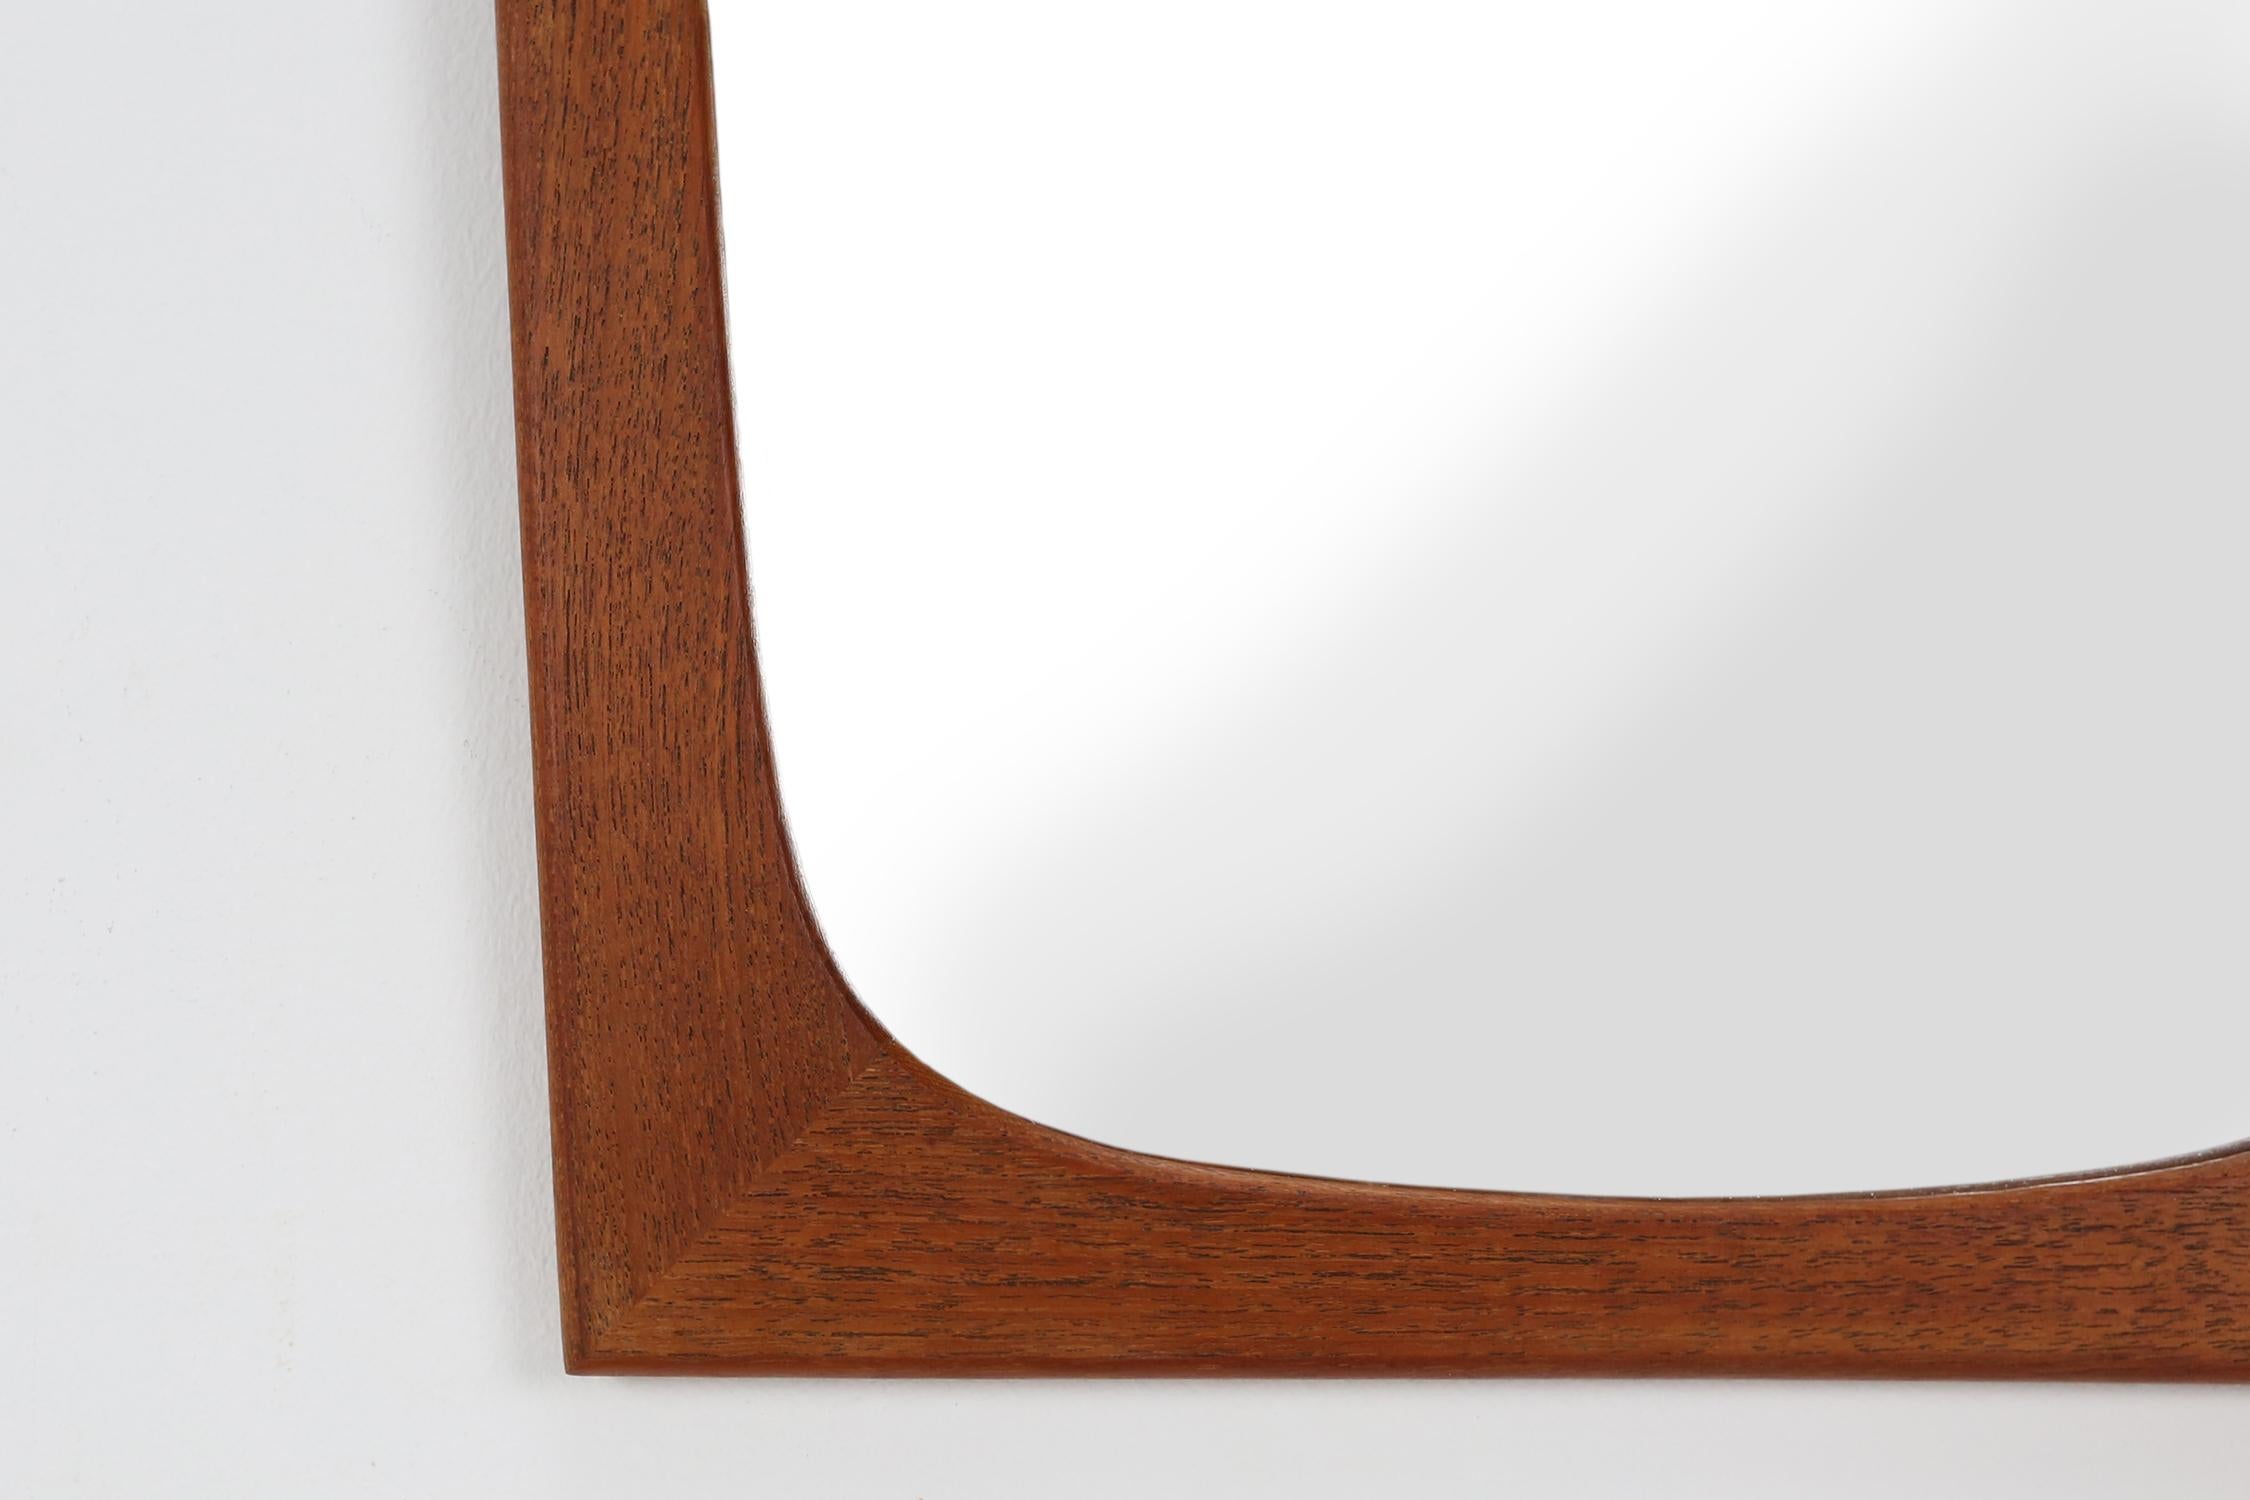 The mirror was manufactured in Denmark in the 1960s and has an original teak frame that surrounds the mirror. It is characterized by a minimalist form.